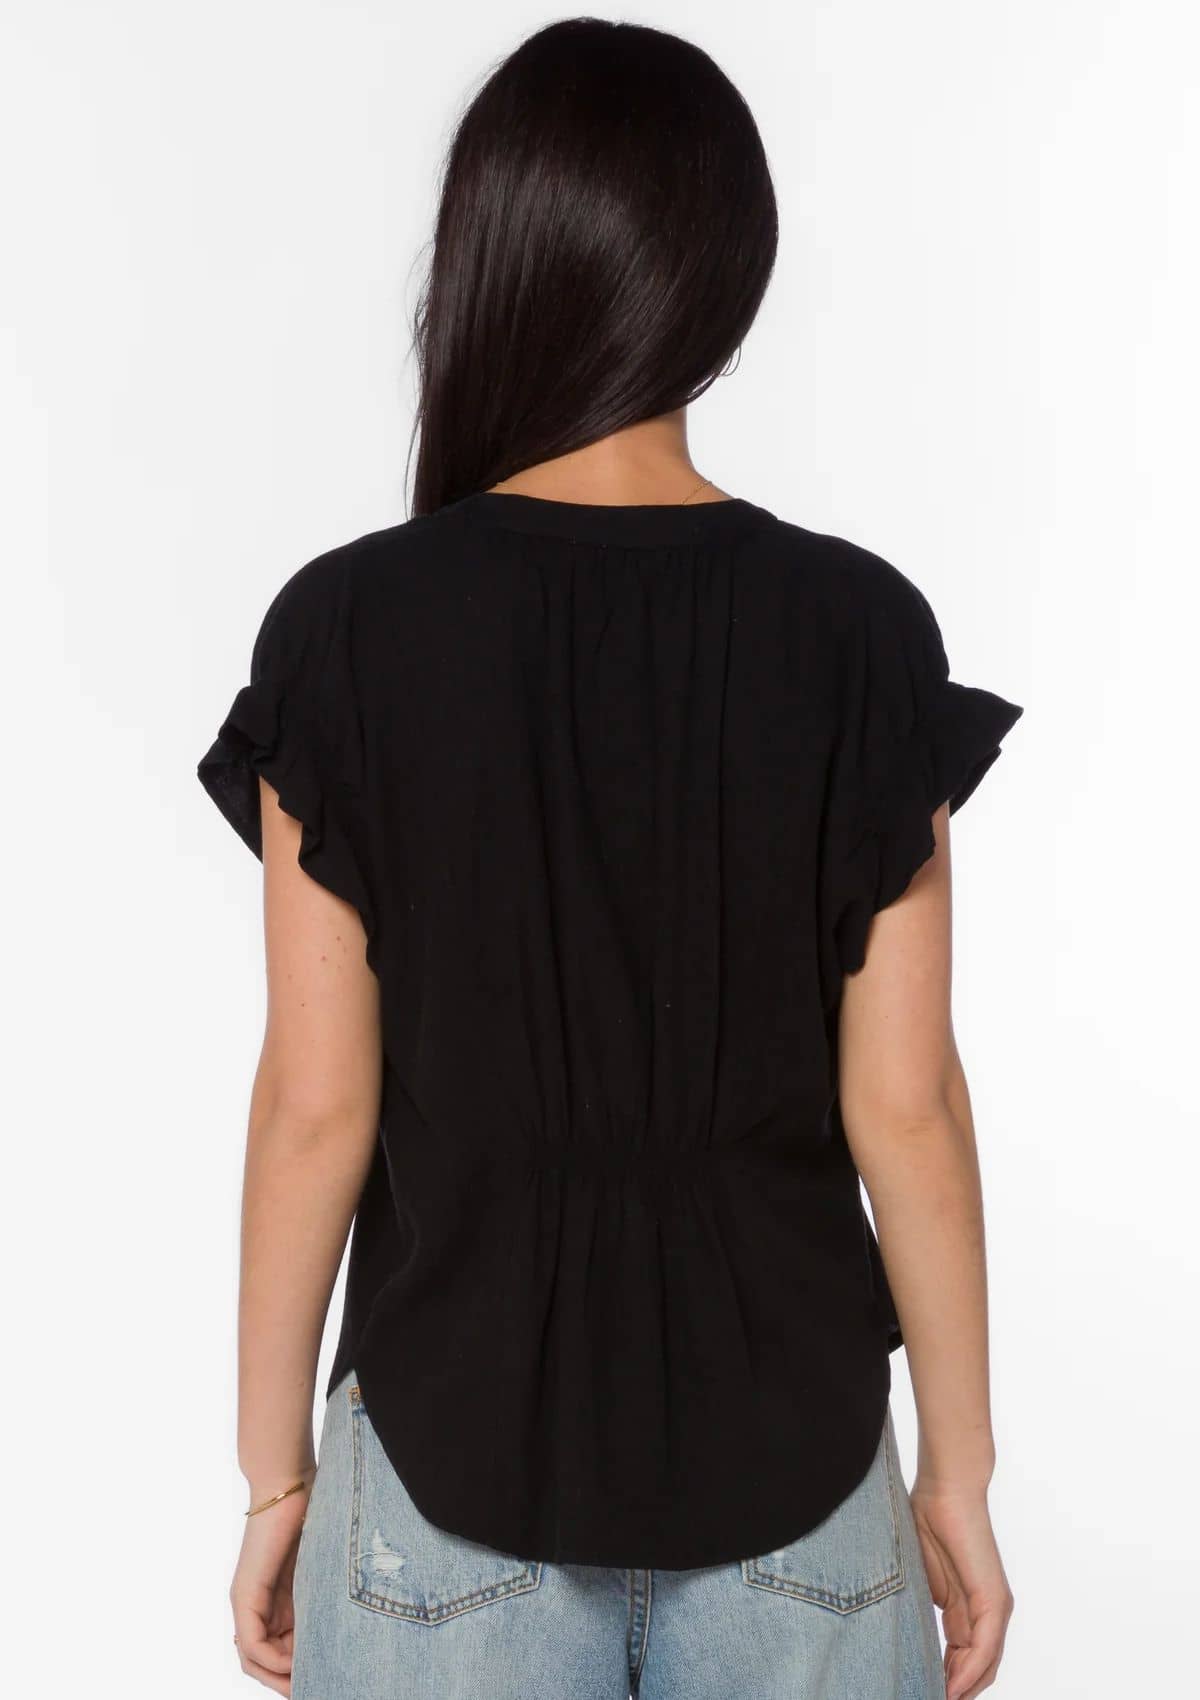 Ruffle short sleeves with cinched back.